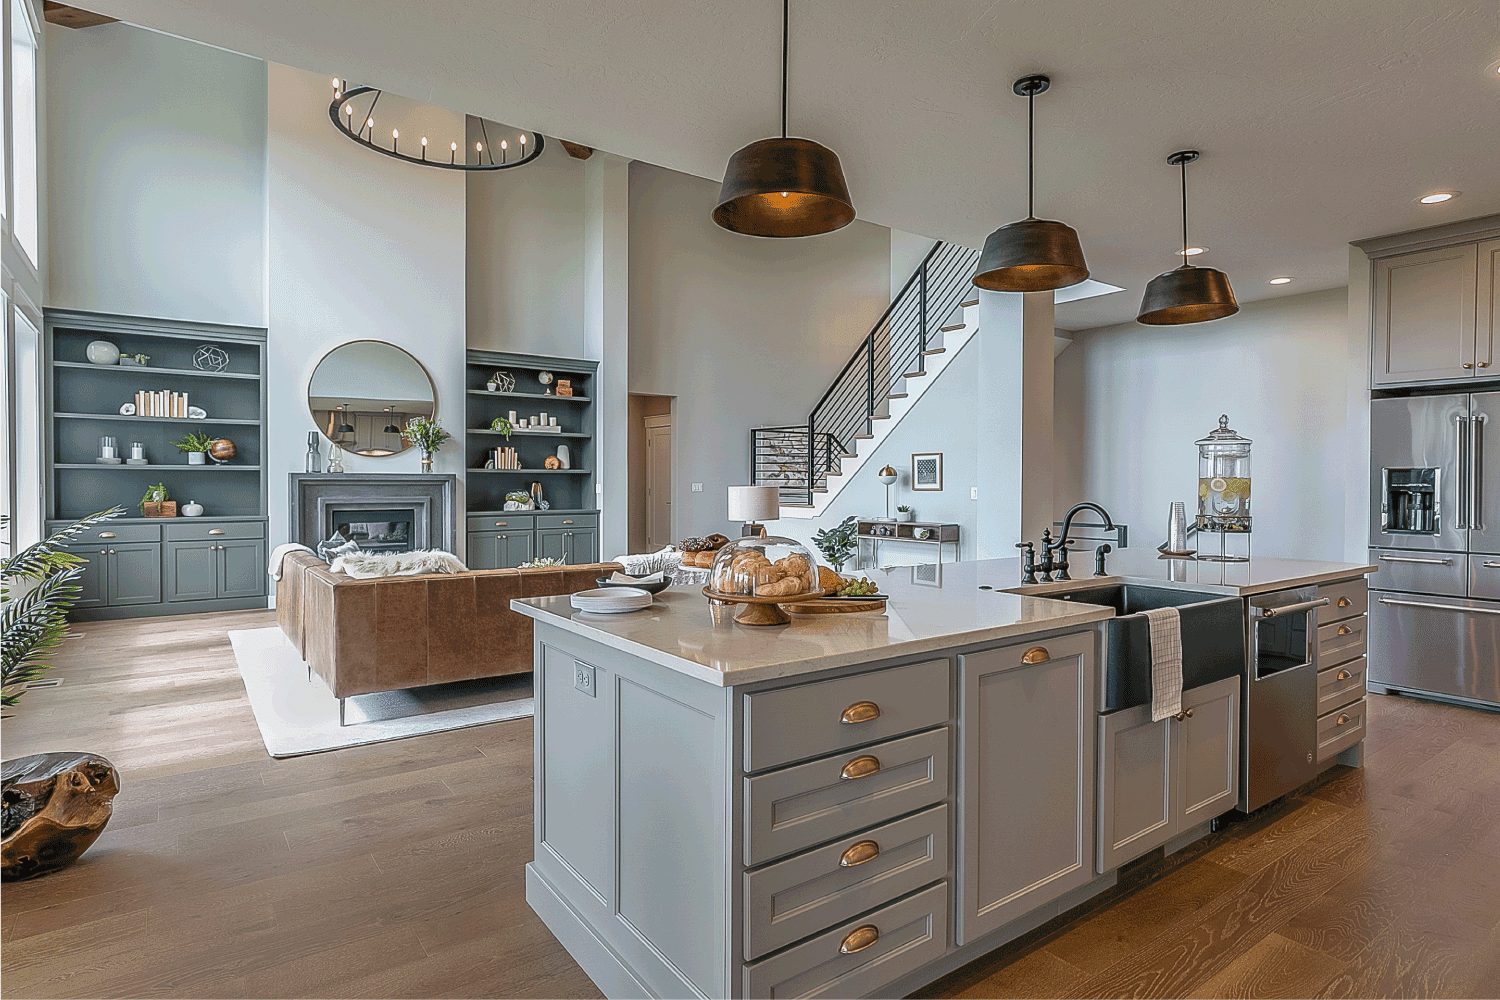 Kitchen island with gray and white colors